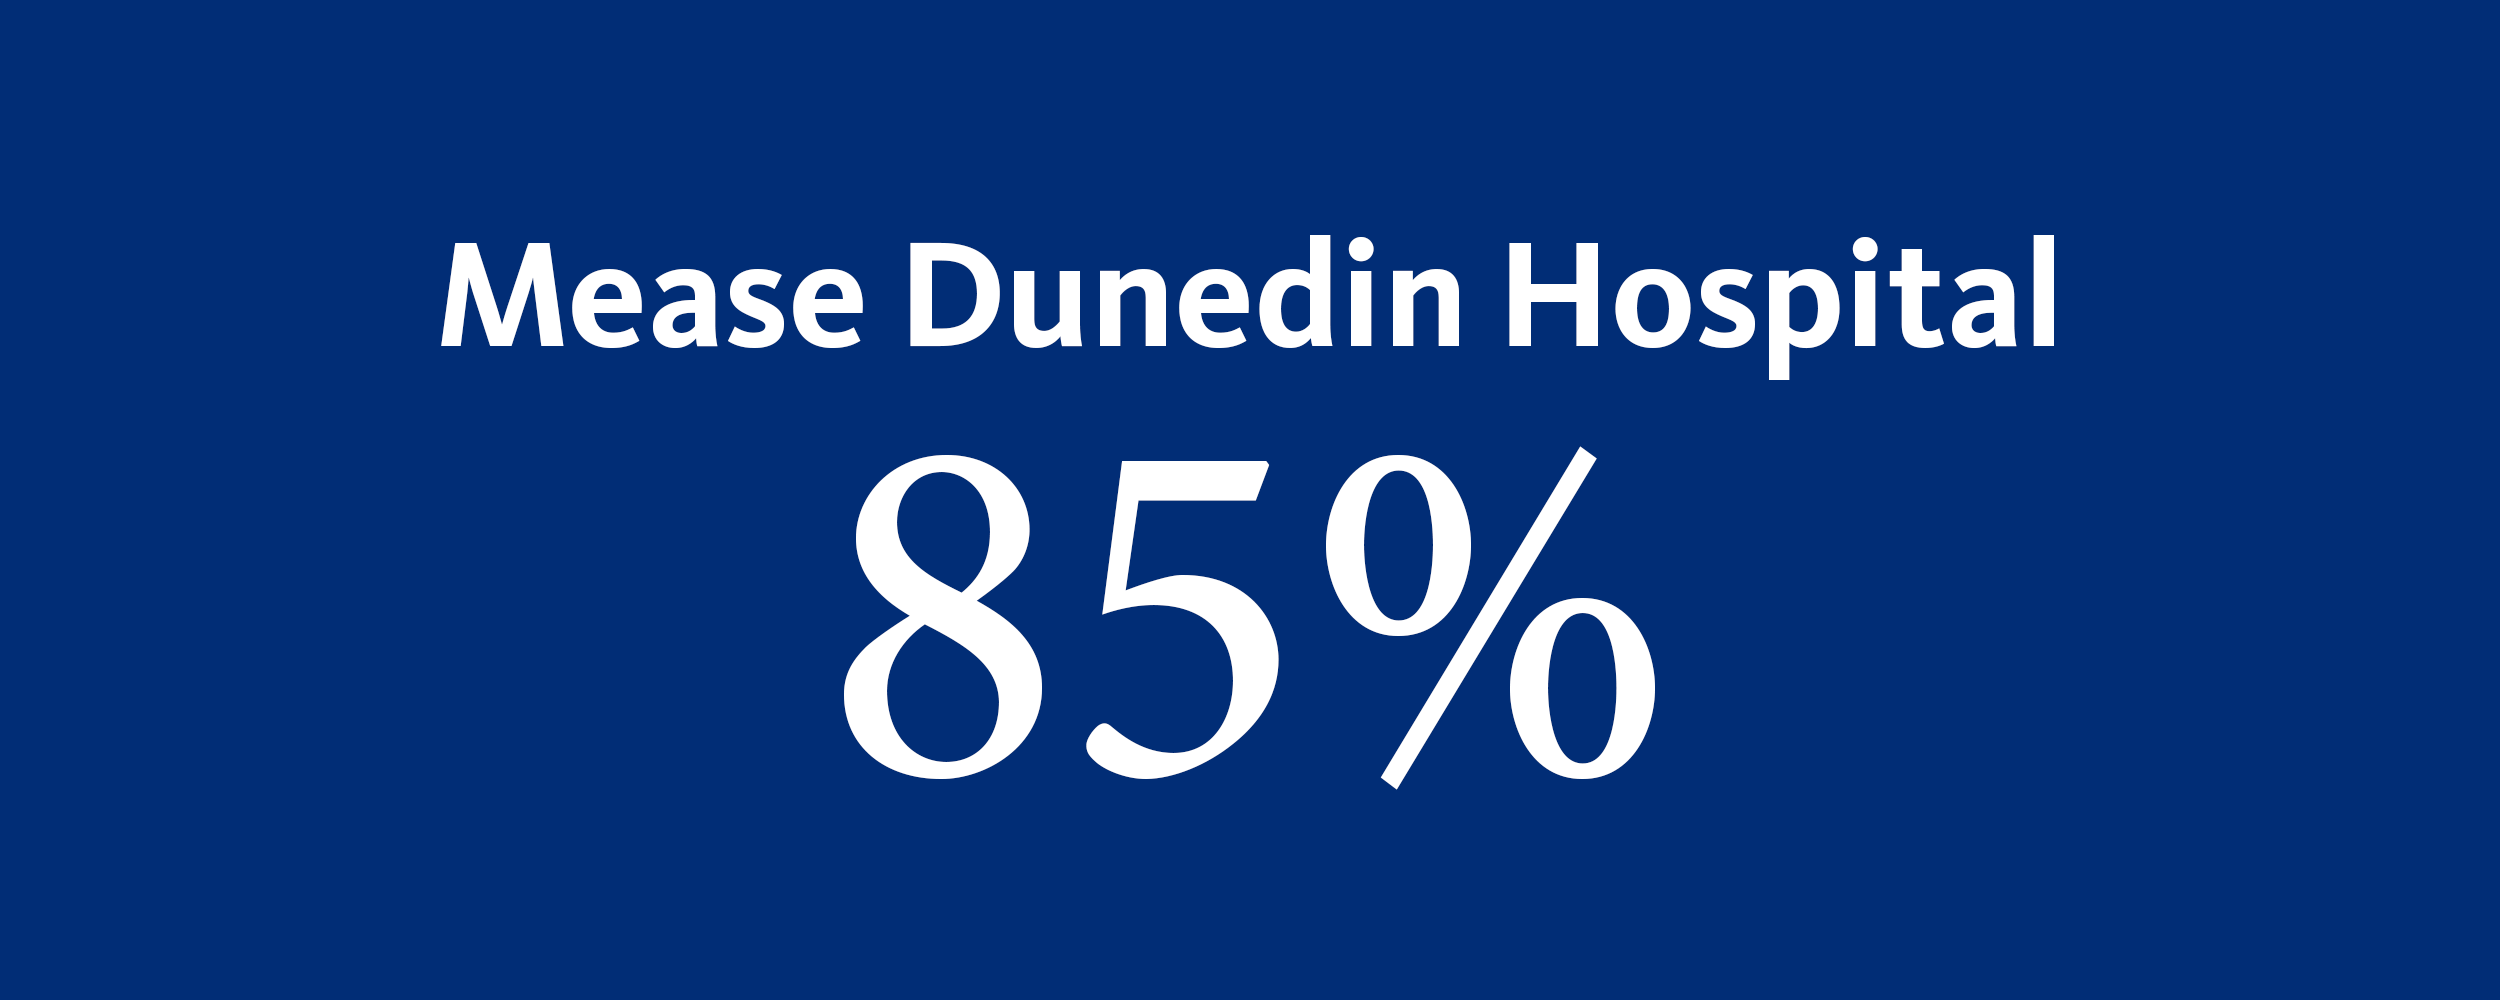 Mease Dunedin Hospital overall recommendation